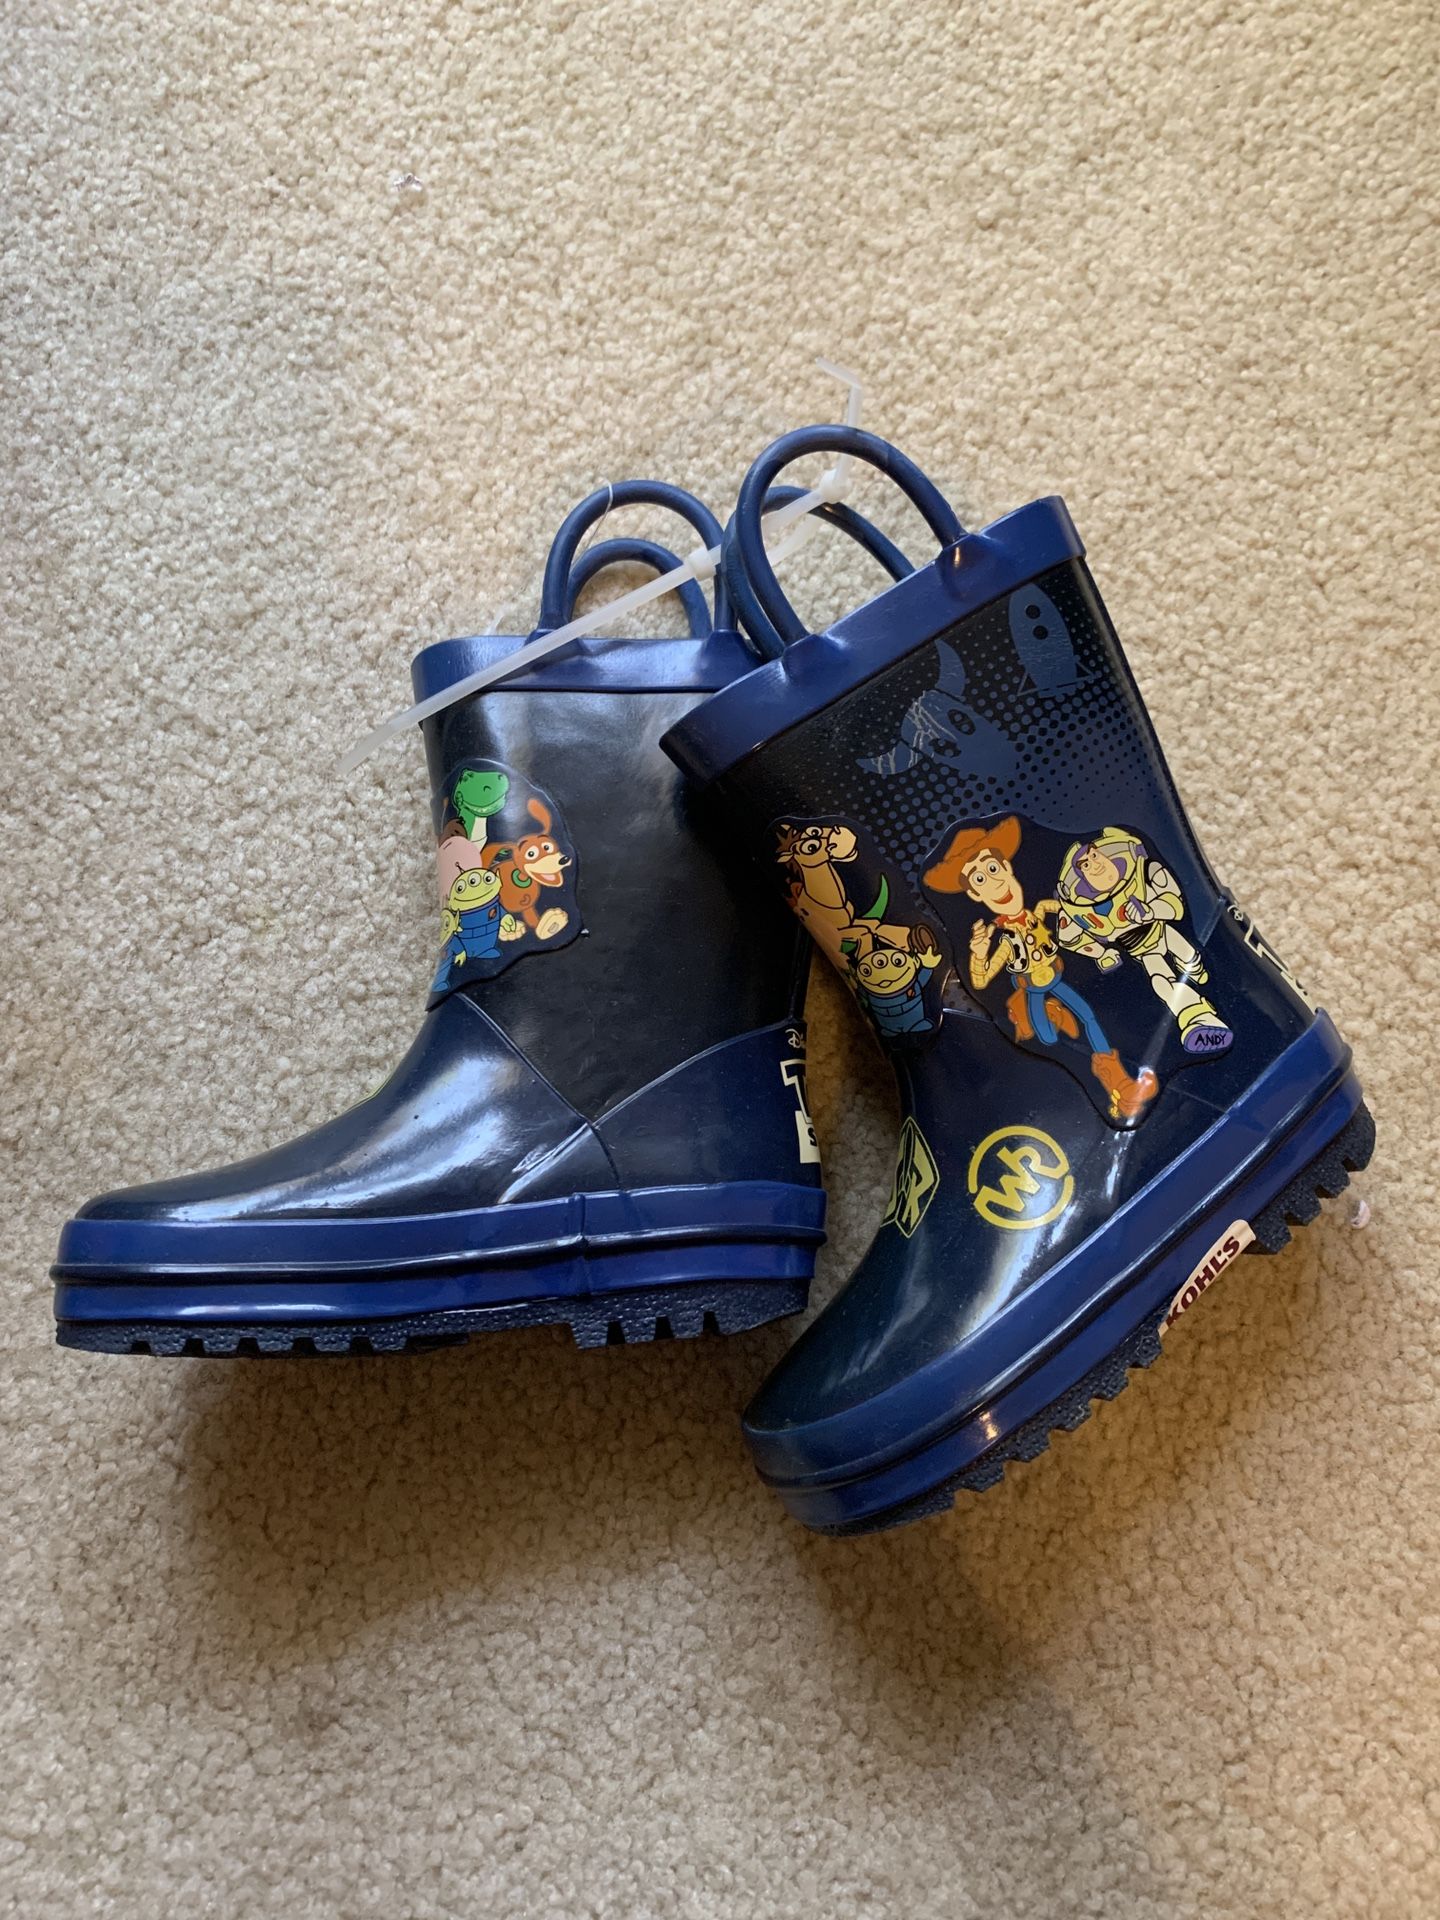 Toy Story Kids/Toddlers Rain Boots Size 6/7 OR Size 4/5